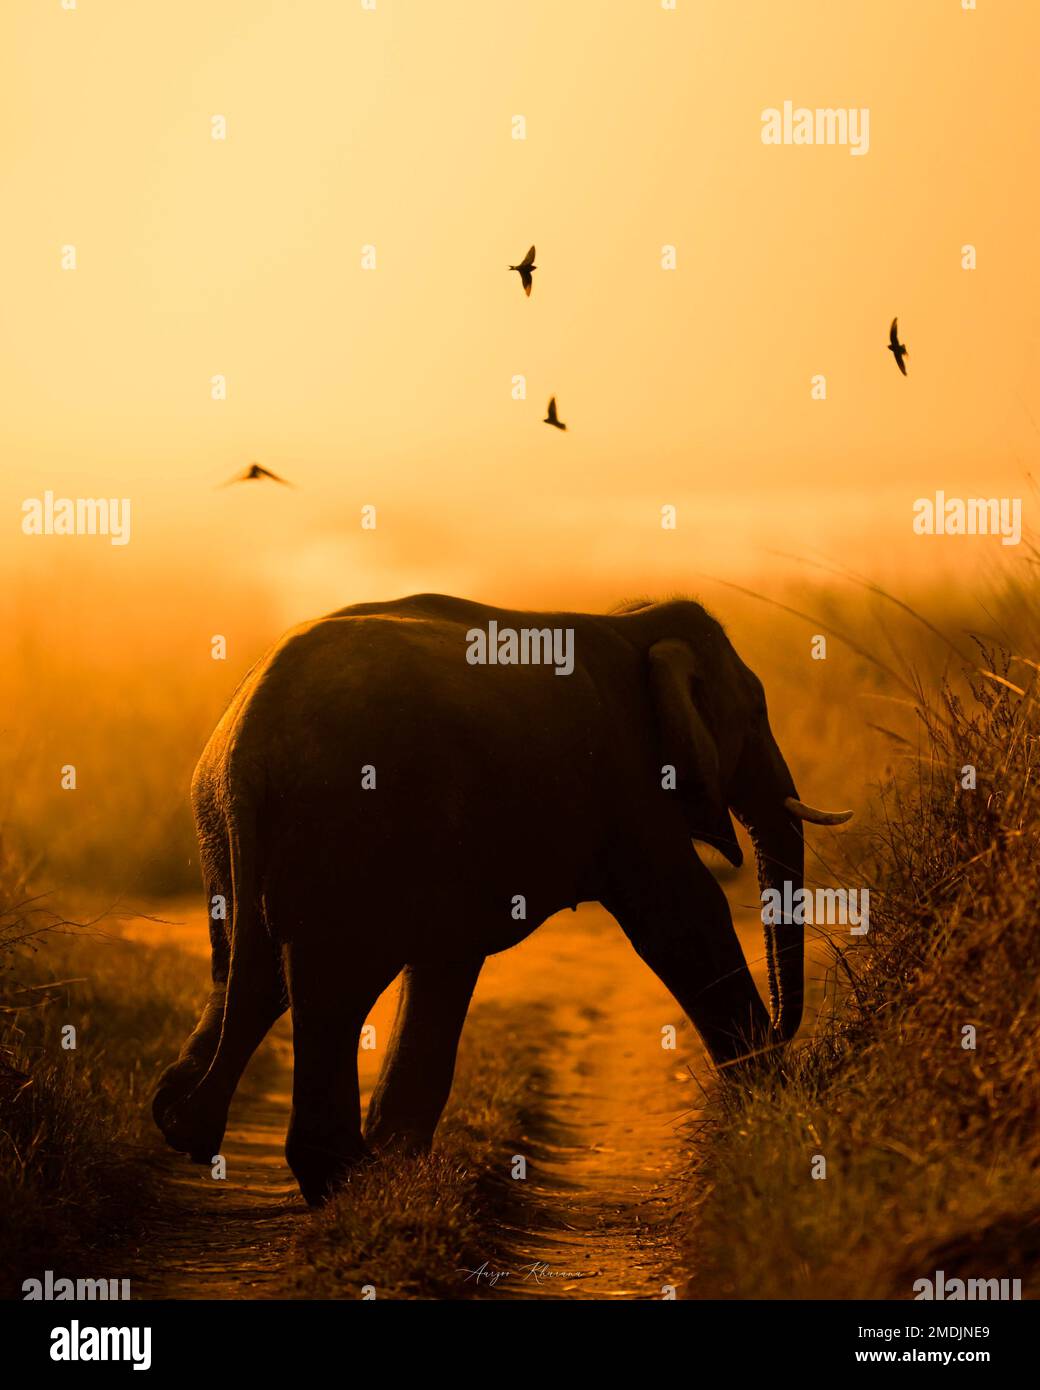 STUNNING images of diverse wildlife have been captured in Rajasthan, India during the golden hour of the day.   From an elephant calf to a stunning st Stock Photo